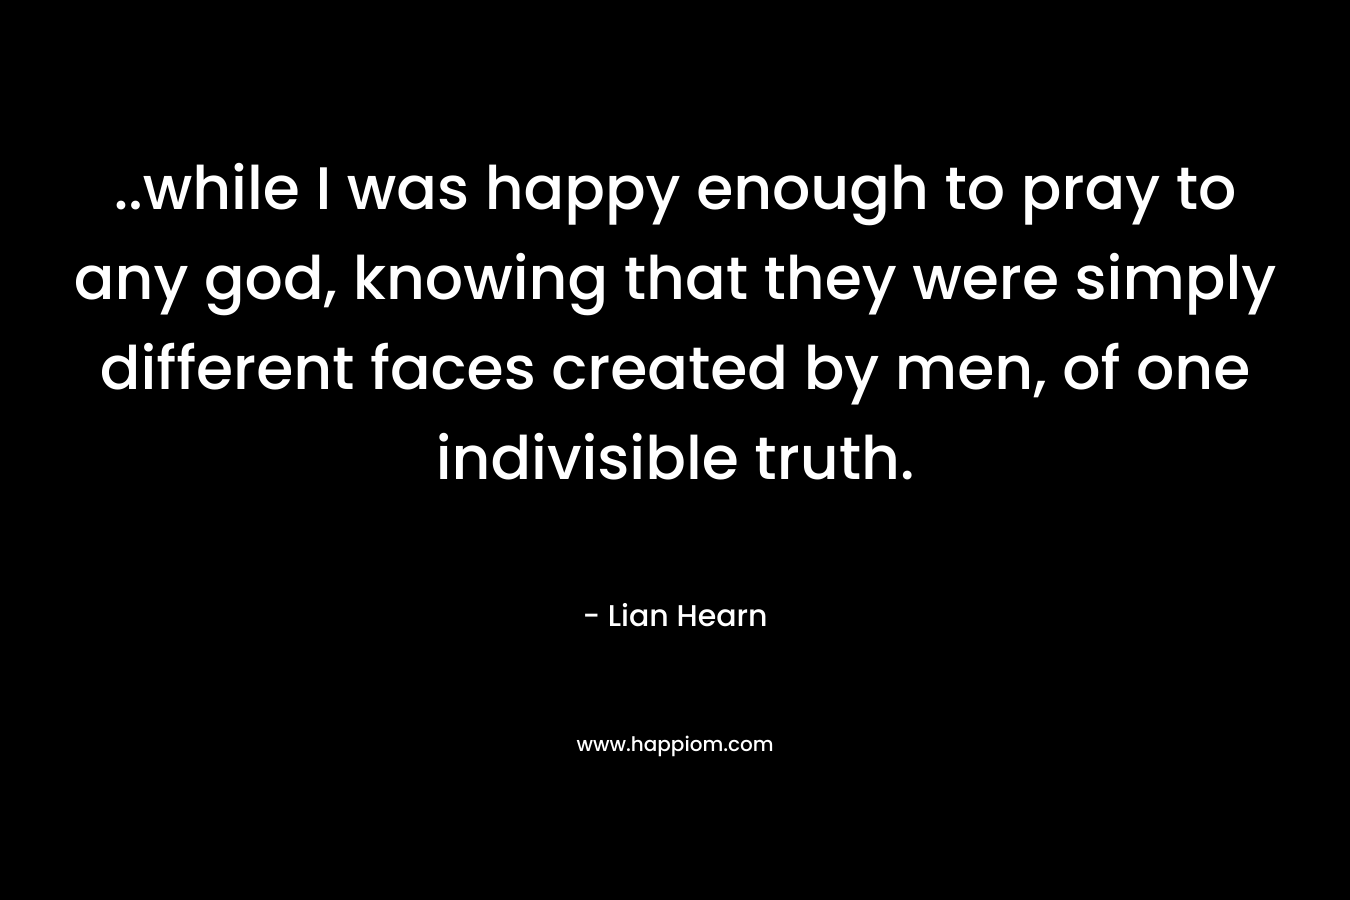 ..while I was happy enough to pray to any god, knowing that they were simply different faces created by men, of one indivisible truth. – Lian Hearn